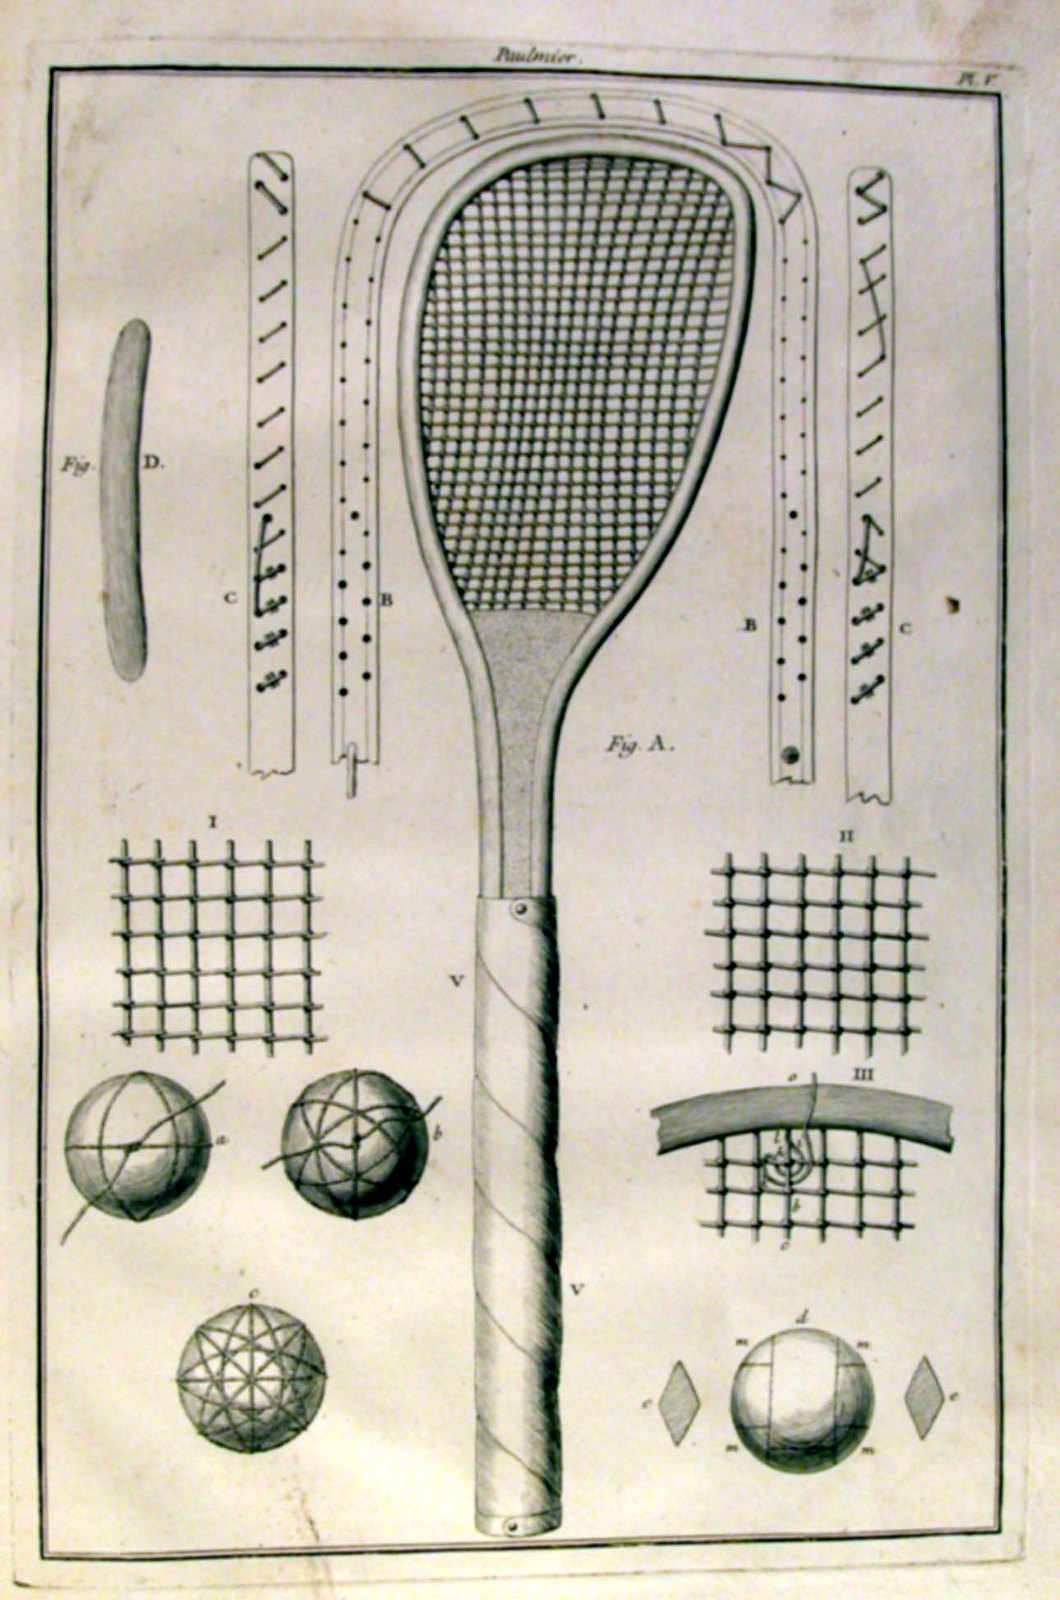 Creation of a tennis racket in the 18th century